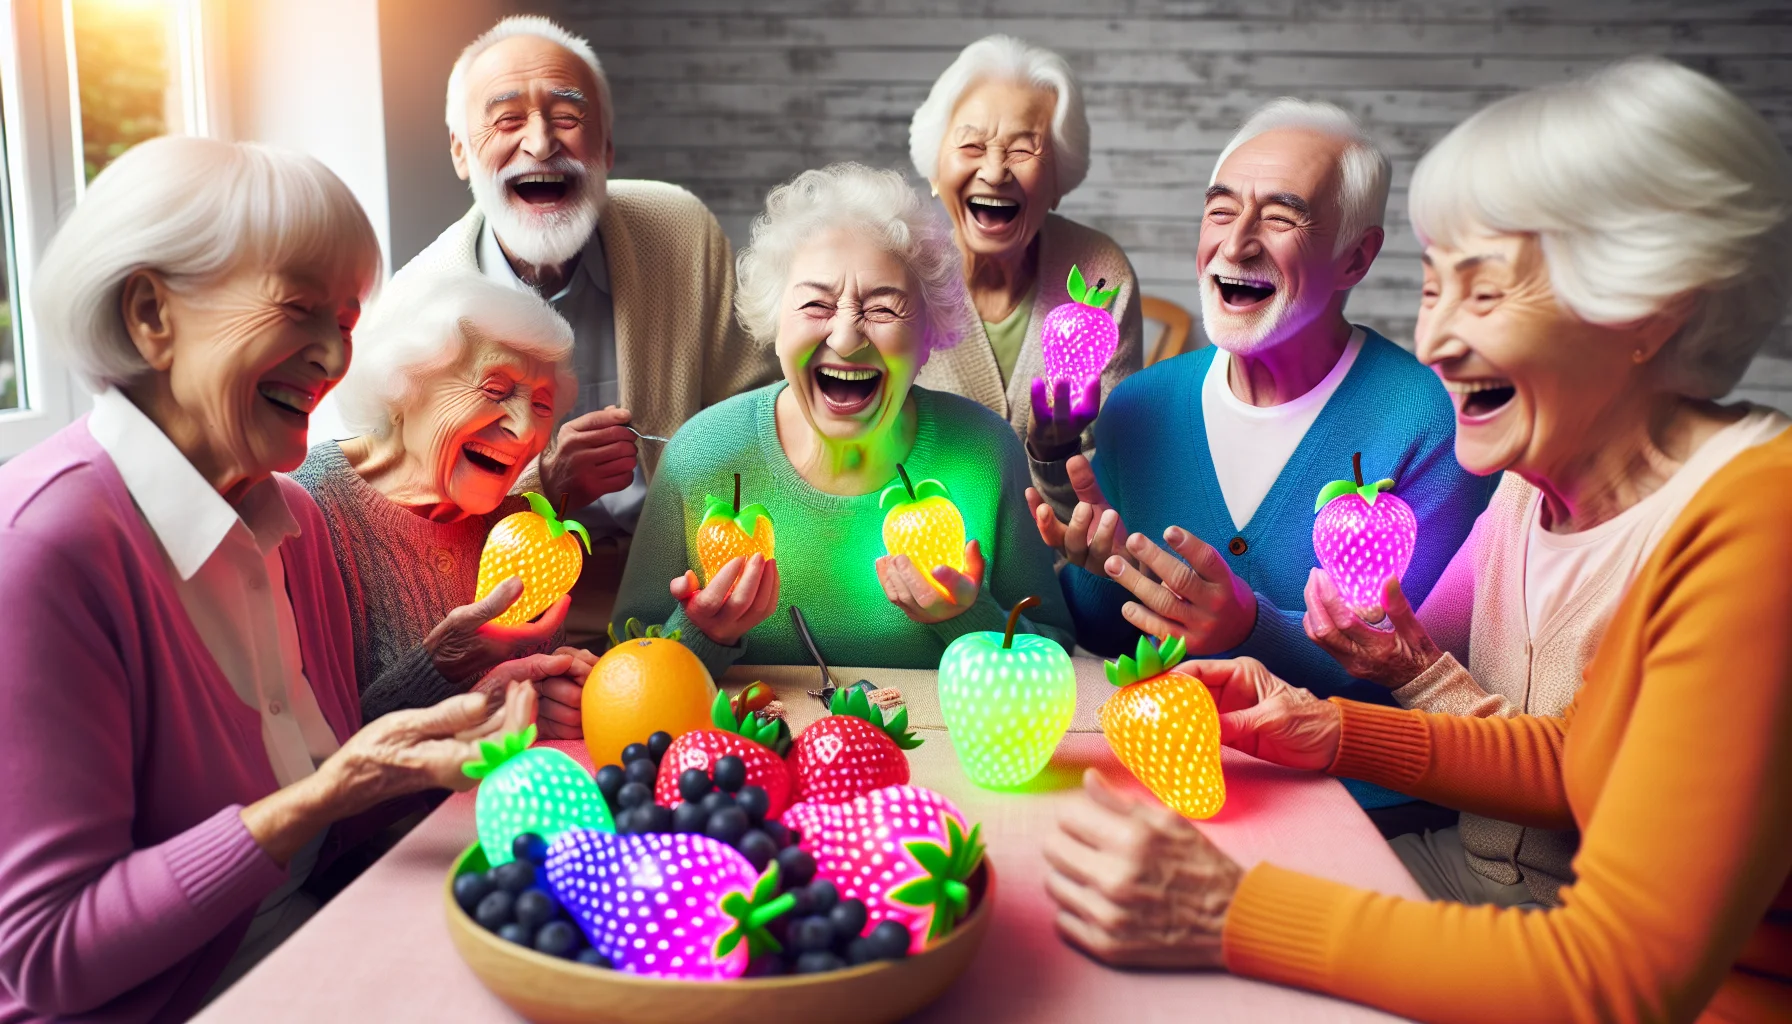 Generate a humorous, realistic image featuring energy fruits in a lively senior citizens' home. Envision a gathering of elderly individuals of varied gender and descent including Caucasian, Hispanic, Black, Middle-Eastern, and South Asian. These lovely seniors are enjoying a colorful assortment of energy fruits like neon-green kiwis, dazzling blue strawberries, and glowing purple mangoes. They're laughing heartily, exchanging tales of yesteryears while relishing their healthy snacks. Some are scrutinizing diet charts with amused expressions, finding the mention of 'energy fruits' baffling. Yet, the joy and spontaneity in the room light up their lives as much as the luminescent fruits they are enjoying.